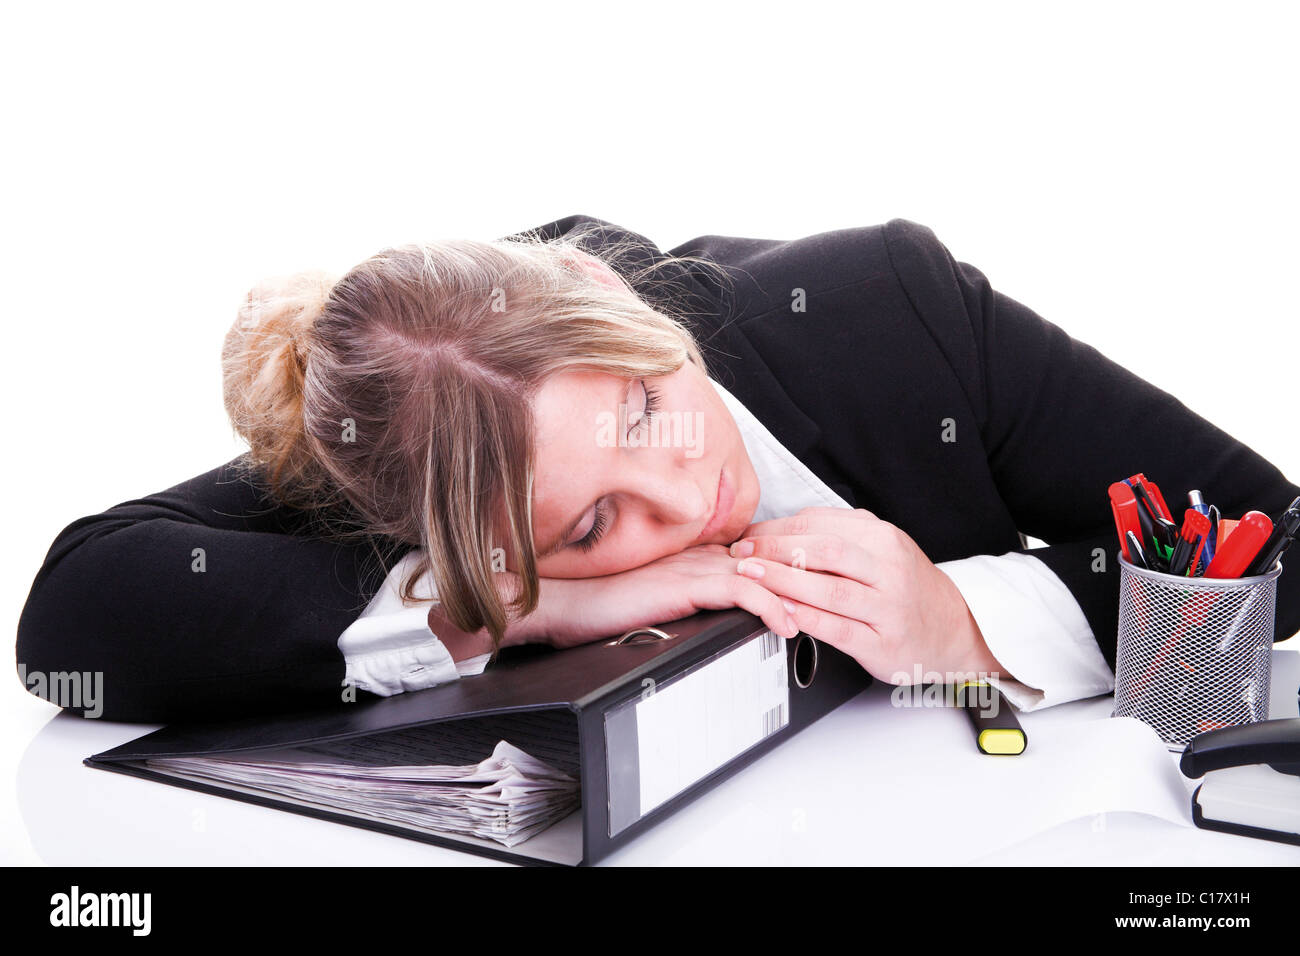 Woman wearing a costume in the office, sleeping Stock Photo